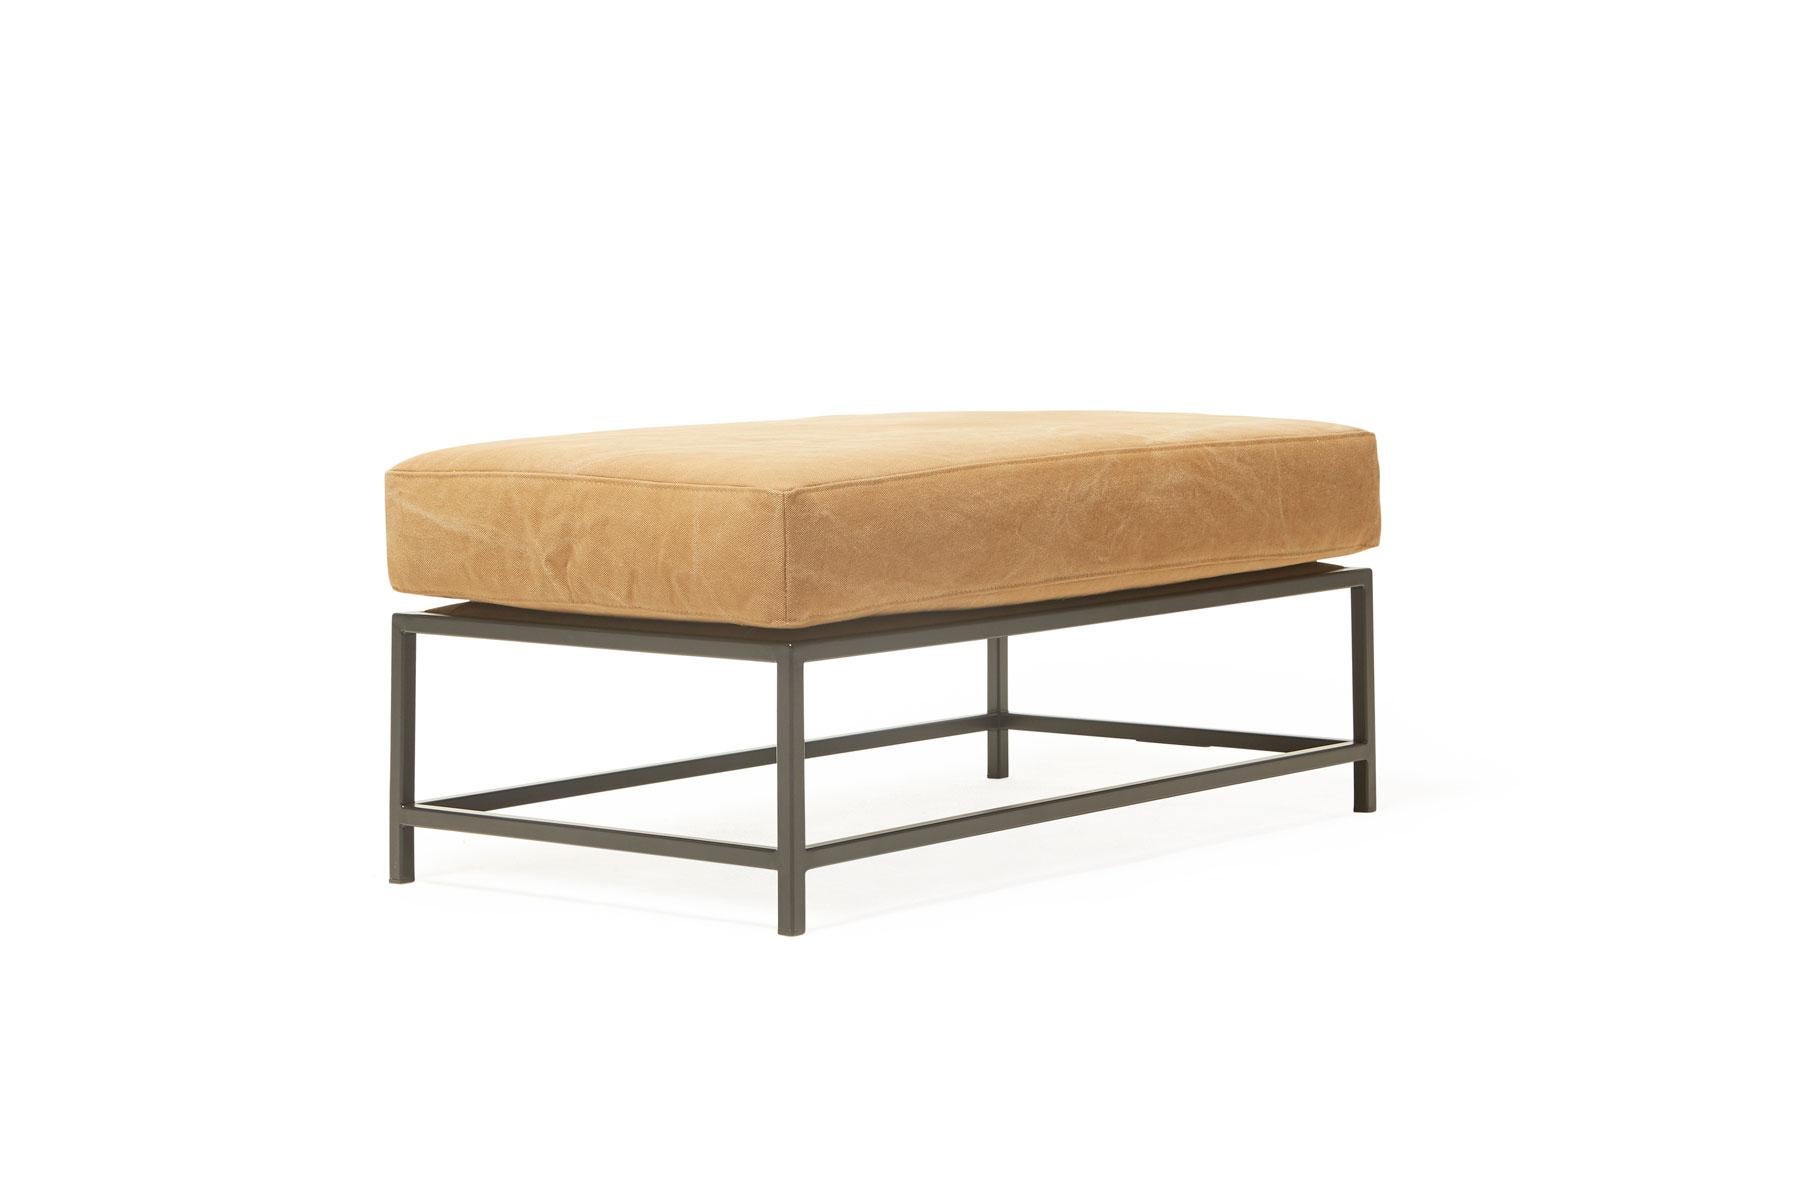 The inheritance bench is a versatile piece that can be used as a chaise extension on any sofa, as an independent seating option or as a large upholstered coffee table.

This variation is upholstered in a deadstock tan canvas. The foam seat